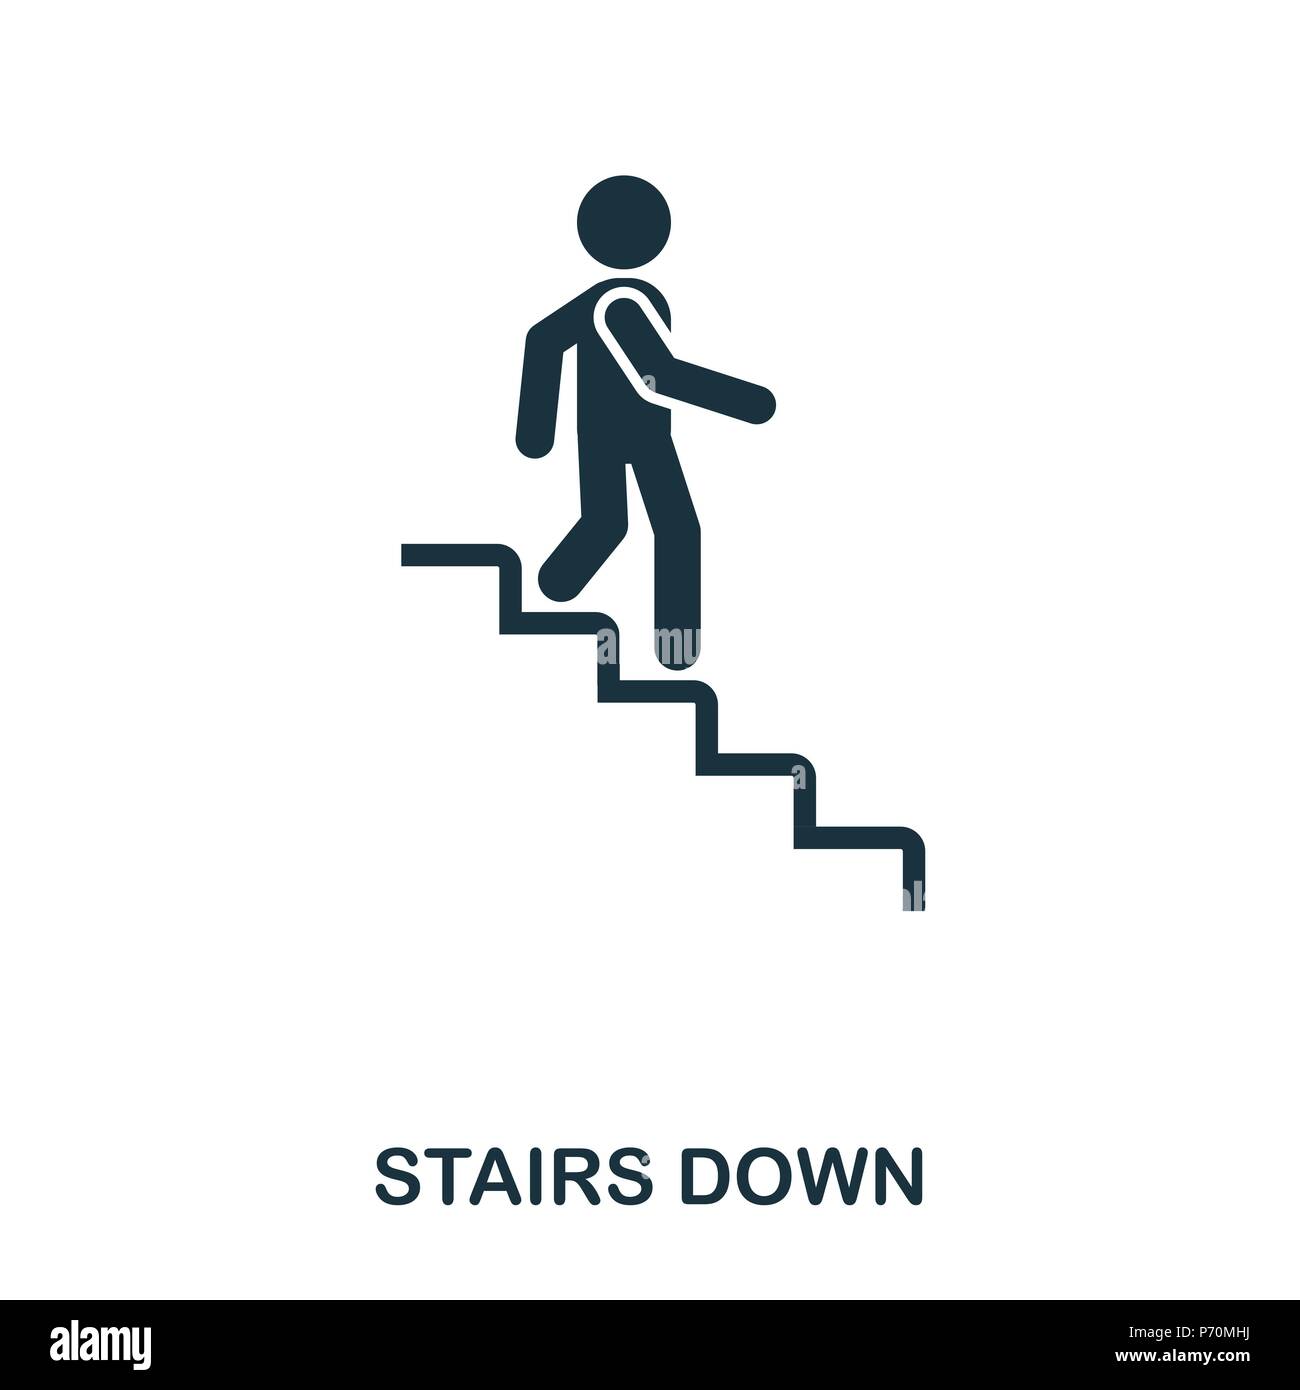 Stairs Down icon. Line style icon design. UI. Illustration of stairs down icon. Pictogram isolated on white. Ready to use in web design, apps, softwar Stock Vector